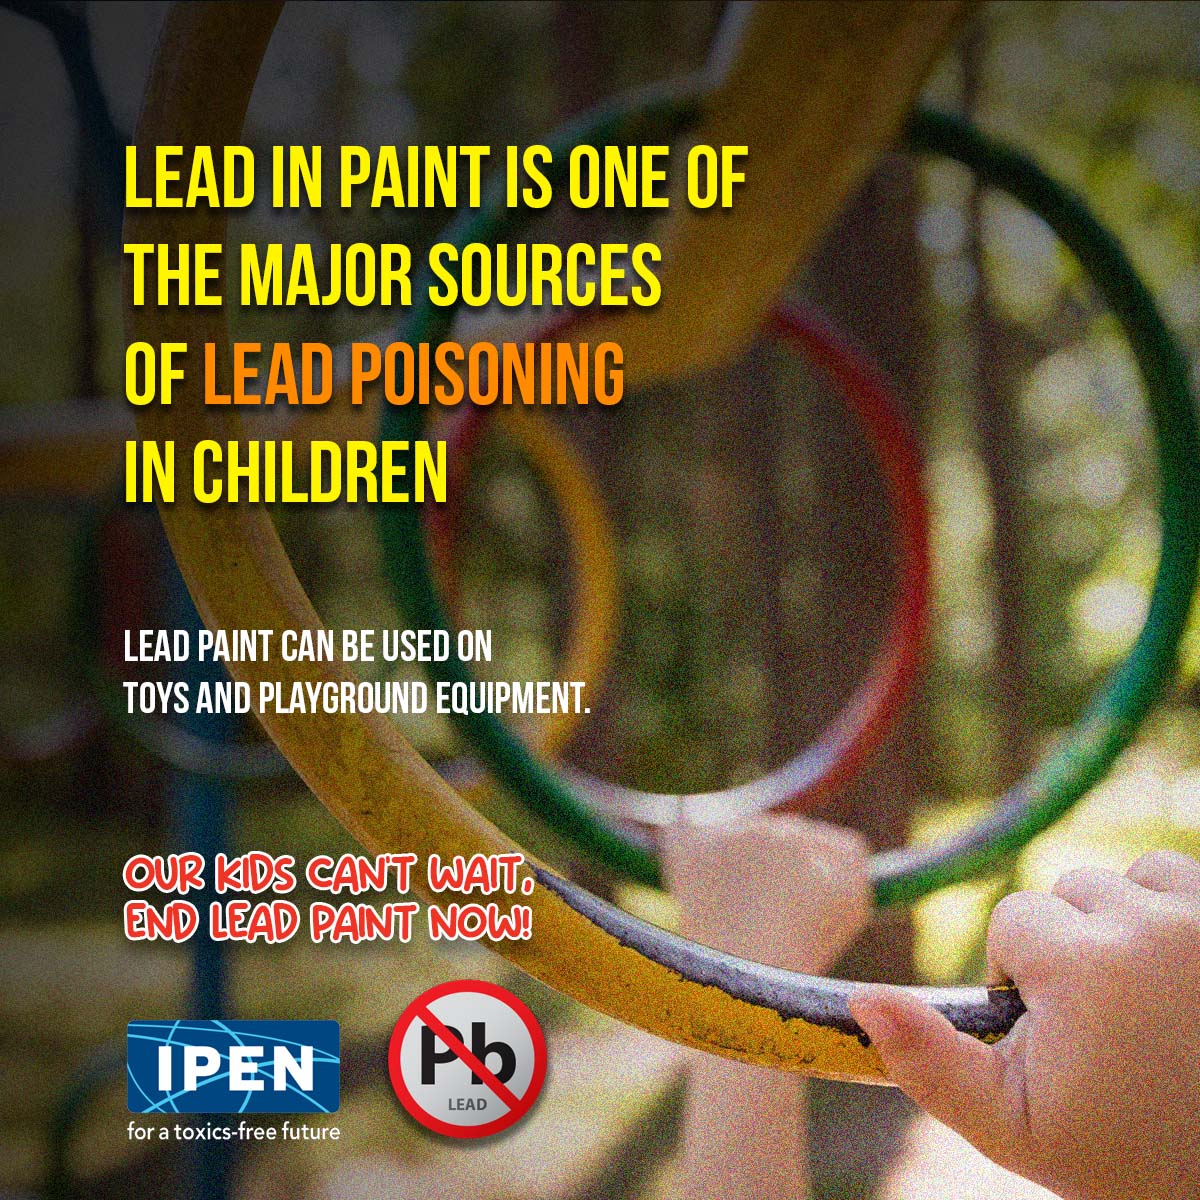 ❗❗Albanian Kids Can’t Wait, End Lead Paint Now❗❗ 👀Read our press release and learn about what EDEN Center is calling for to end the use of #lead paint: eden-al.org/index.php/en/2… #IPEN #BanLead